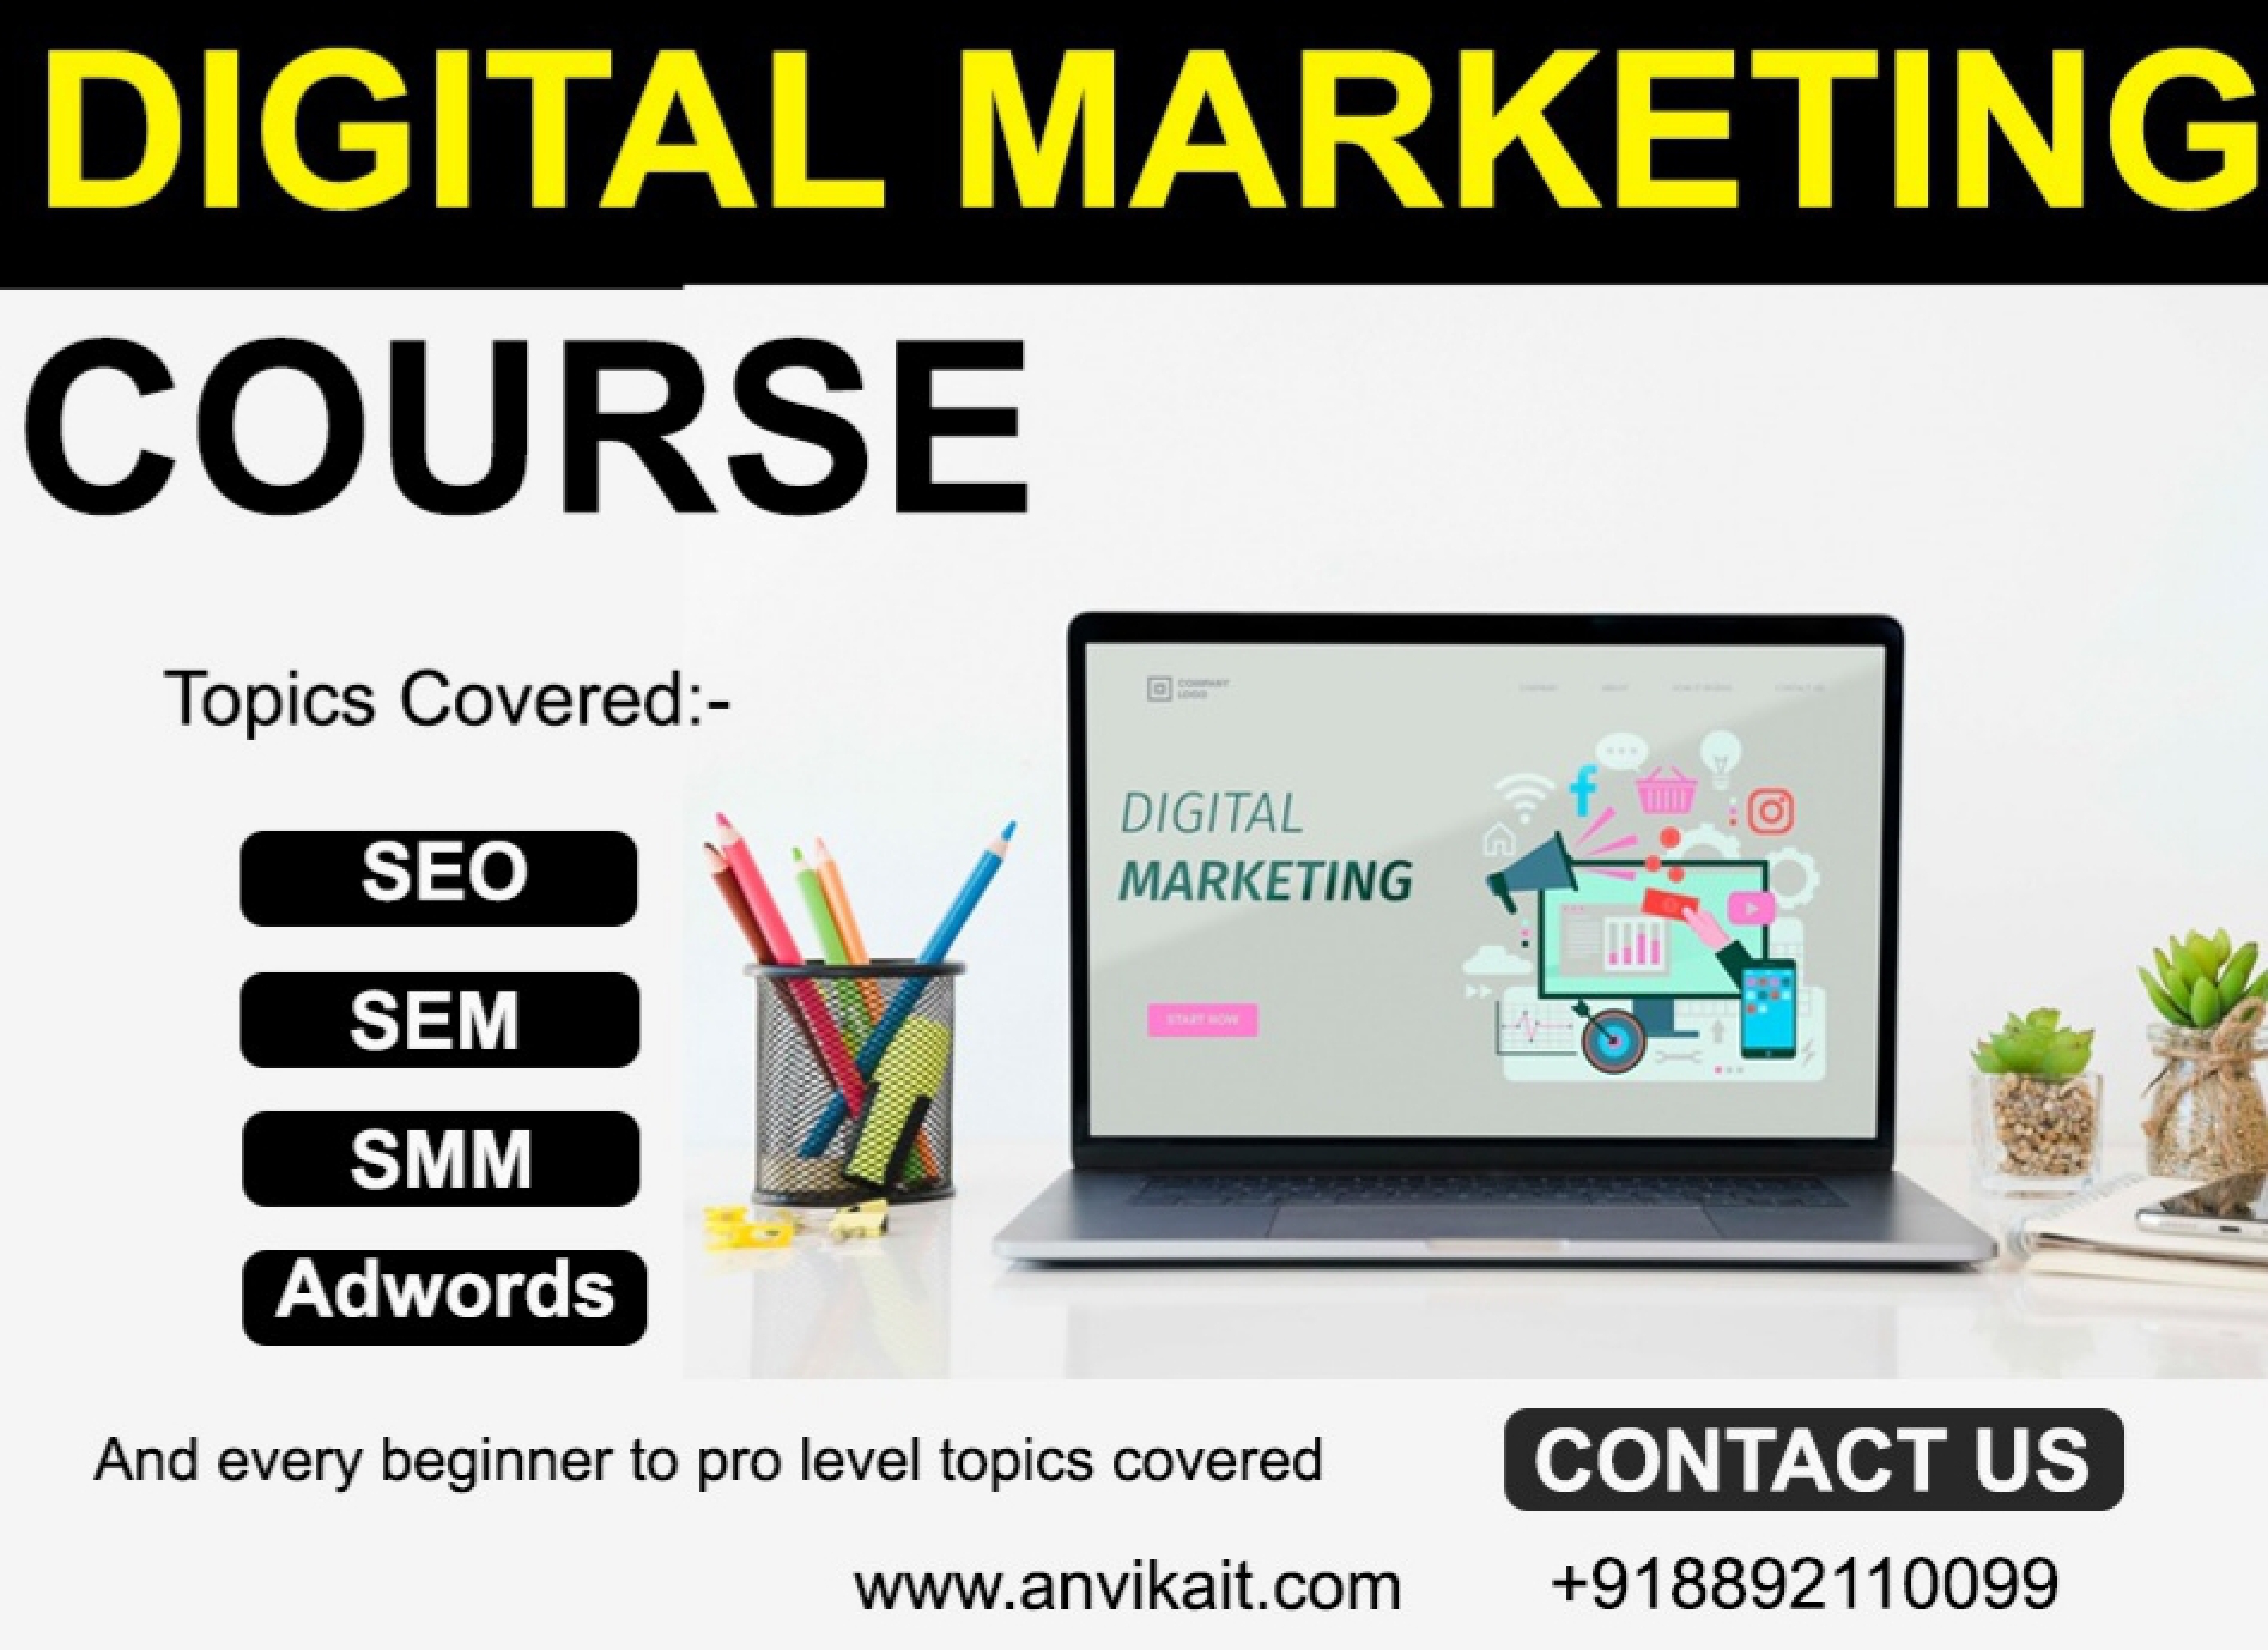 Digital Marketing CourseServicesBusiness OffersAll IndiaBus Stations